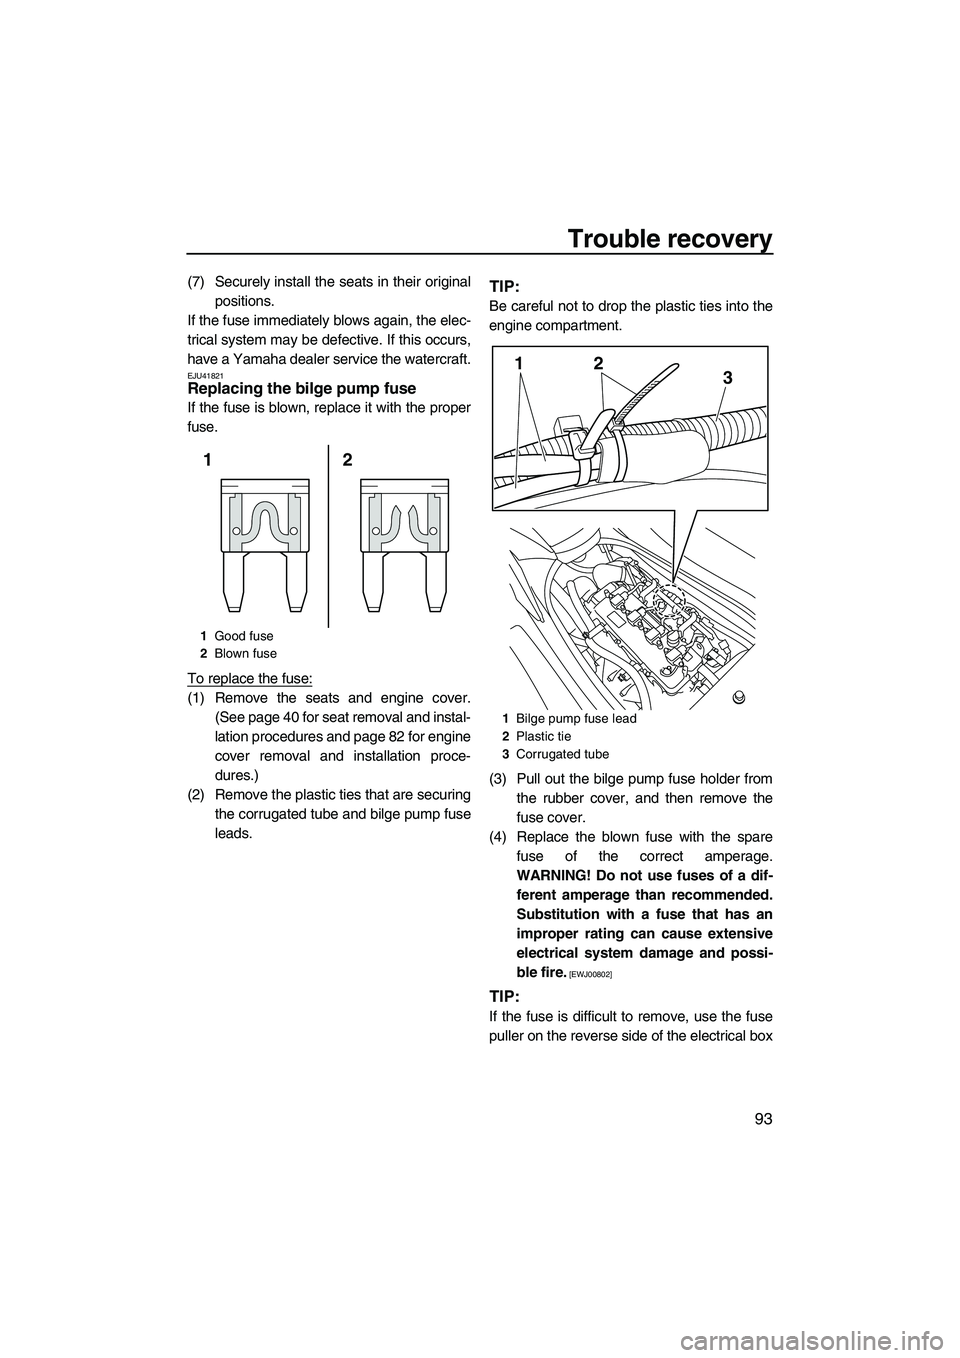 YAMAHA FZR 2012  Owners Manual Trouble recovery
93
(7) Securely install the seats in their original
positions.
If the fuse immediately blows again, the elec-
trical system may be defective. If this occurs,
have a Yamaha dealer serv